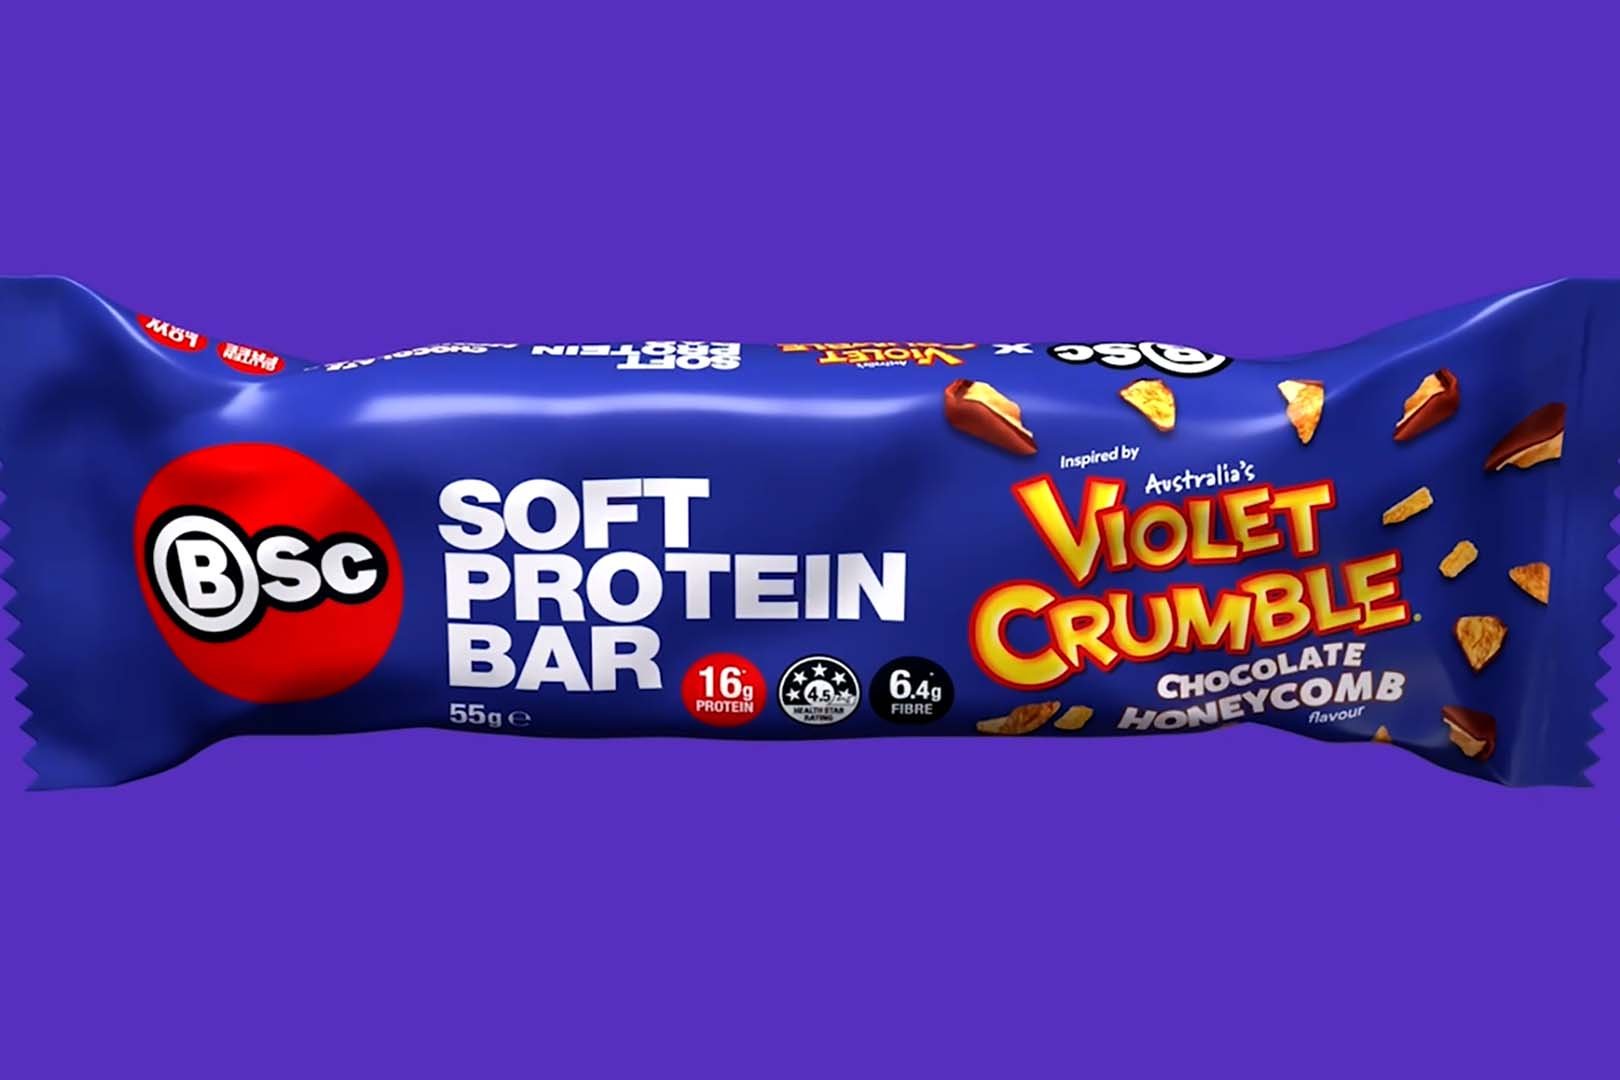 Body Science Violet Crumble Protein Bar